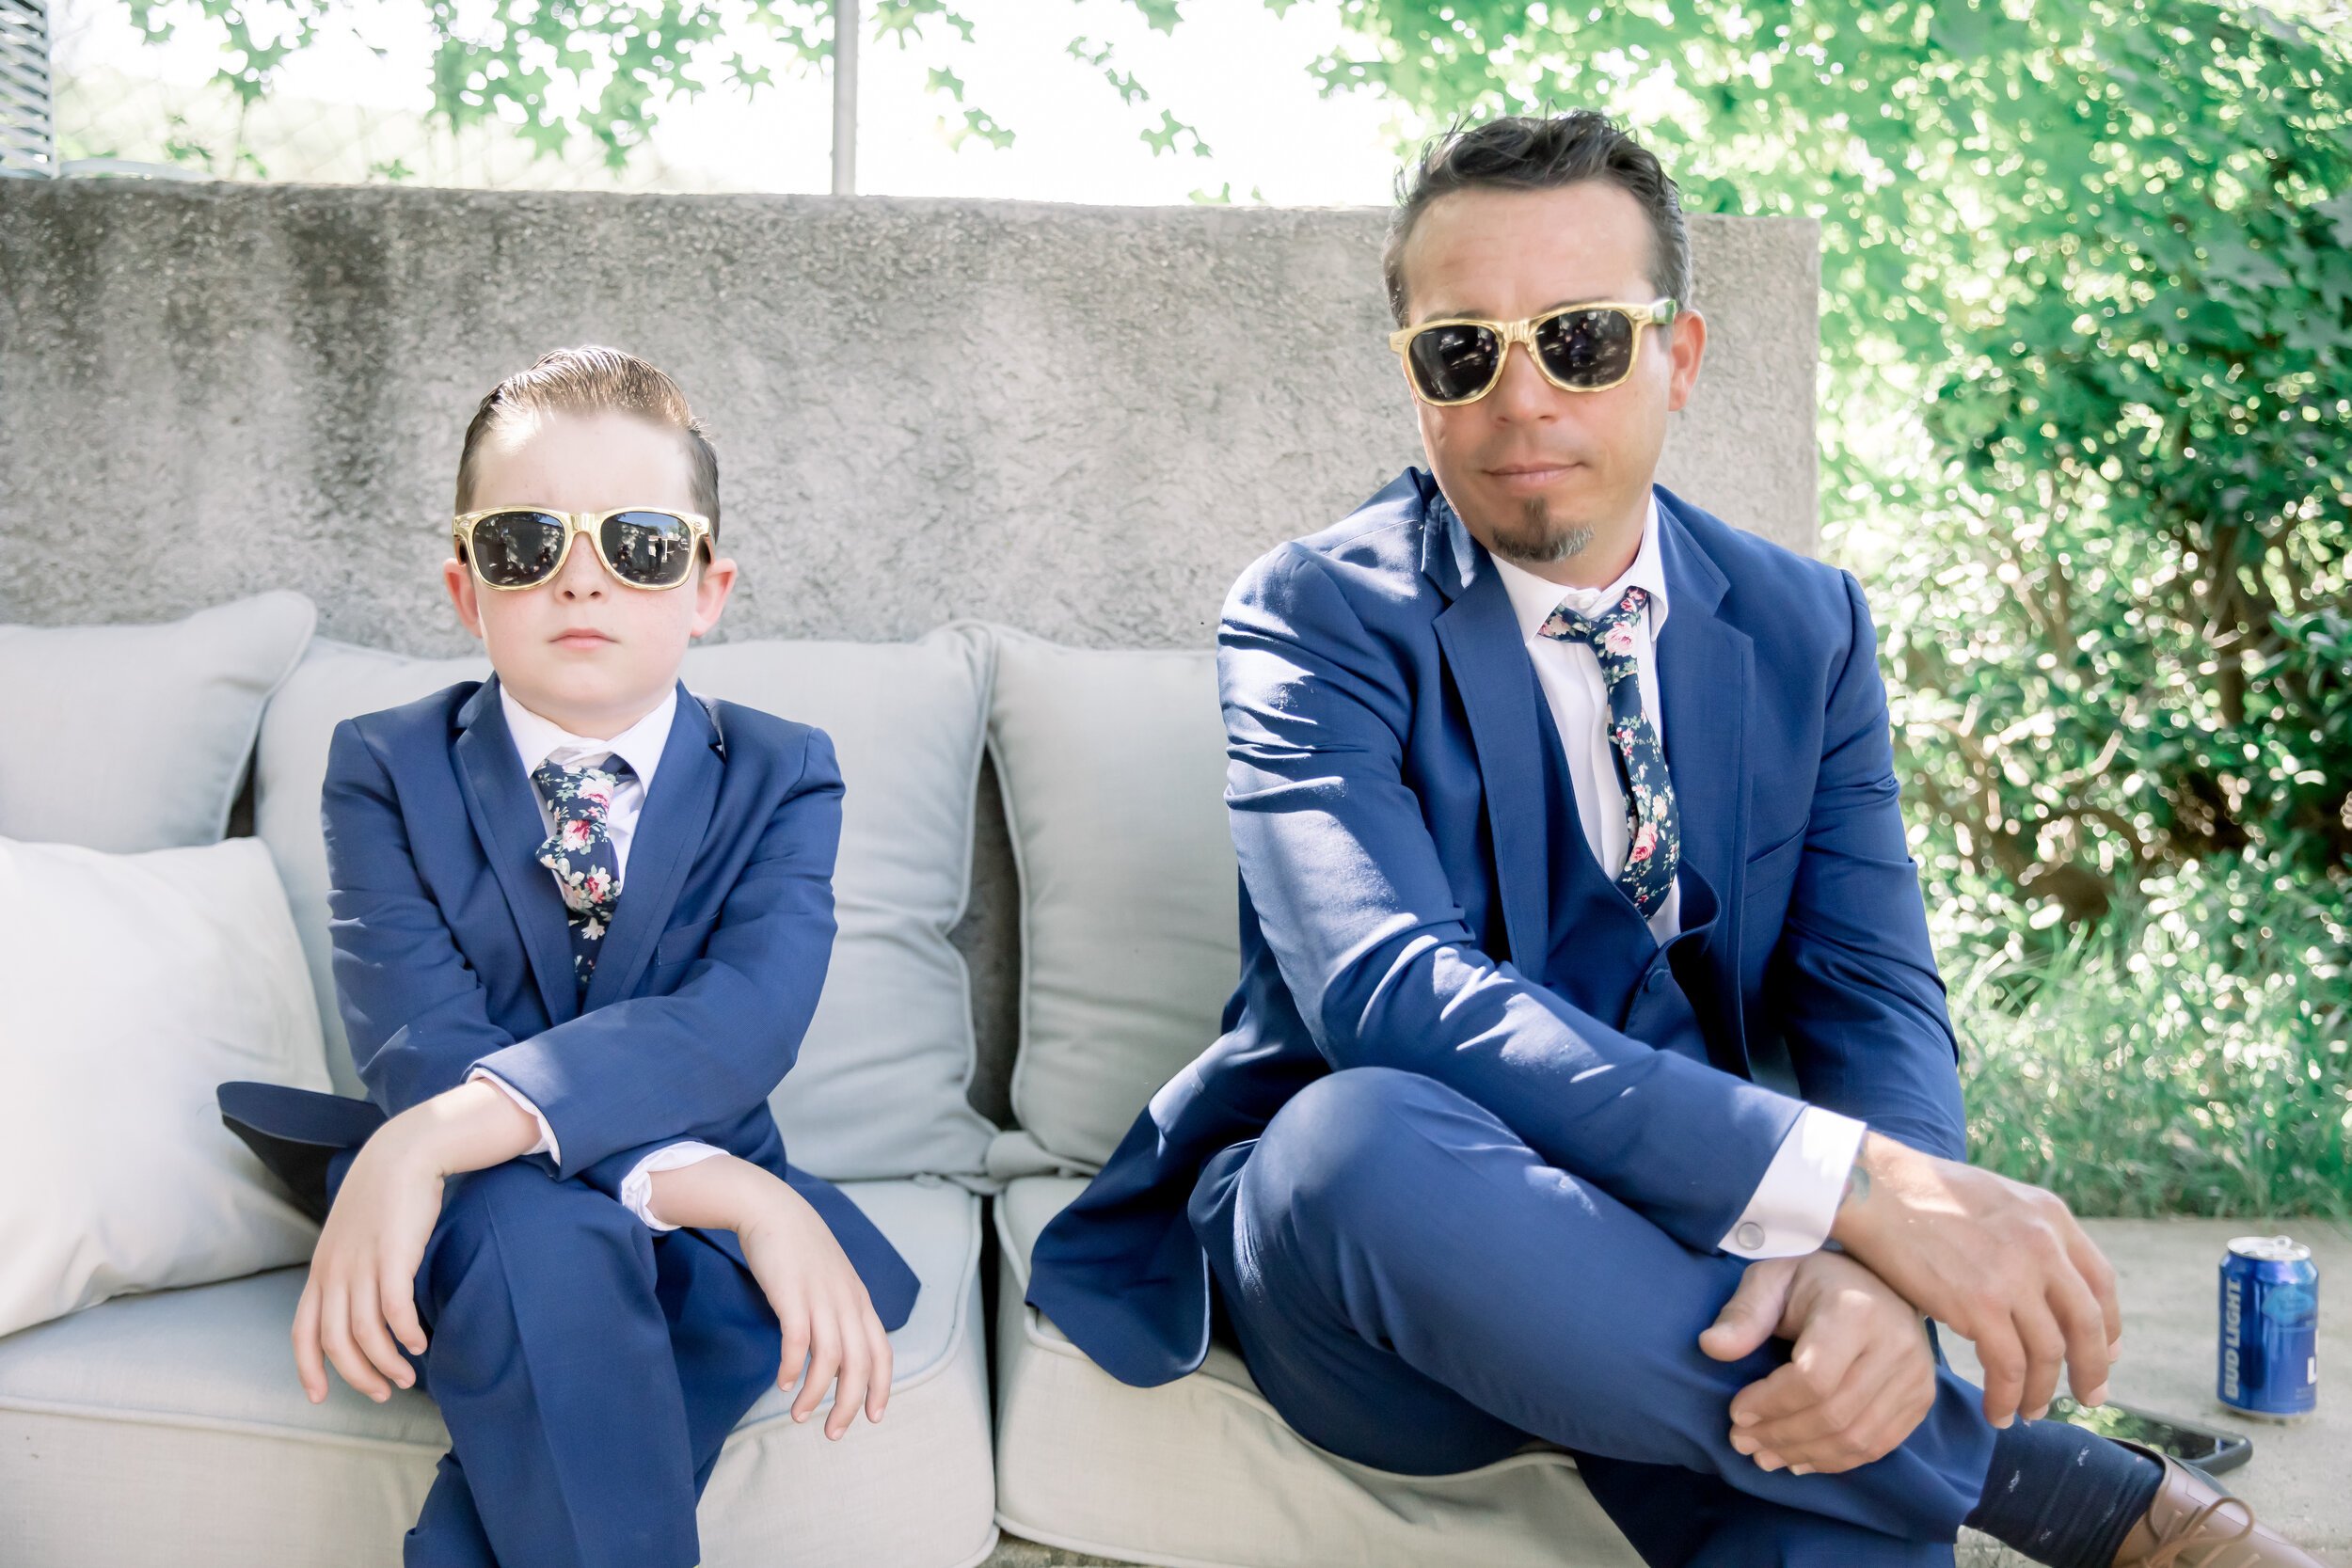 www.santabarbarawedding.com | Rewind Photography | Events by M and M | The Twisted Twig | Adorable Ring Bearer and Groomsman with Sunglasses